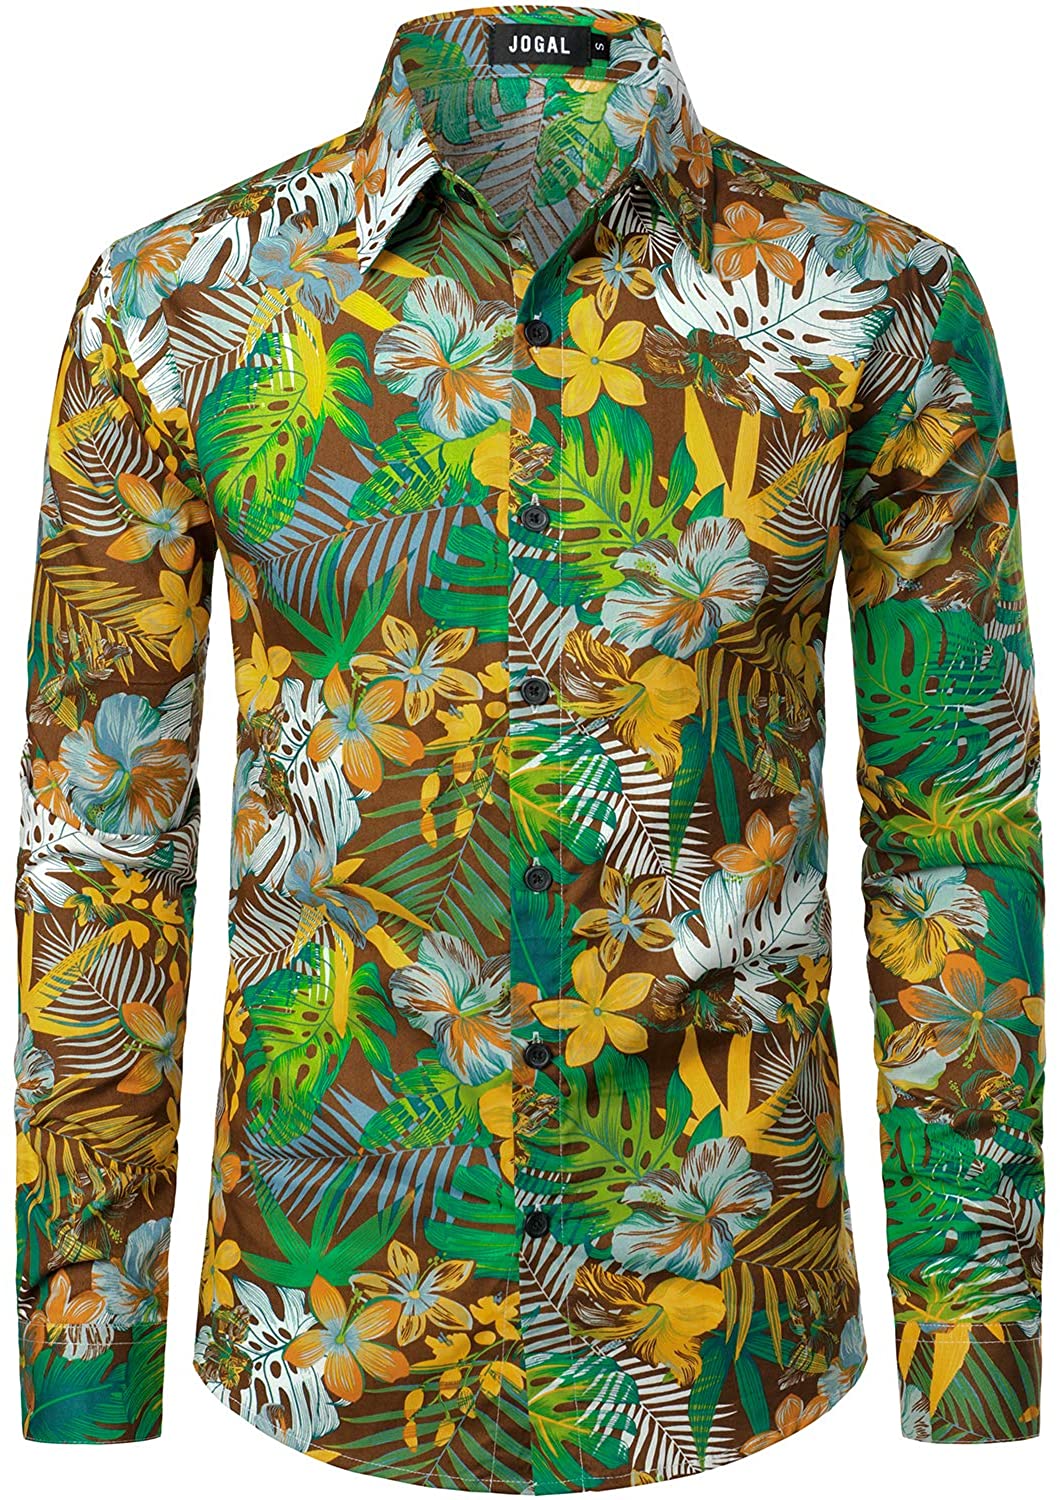 JOGAL Men's Floral Long Sleeve Casual Button Down Shirts | eBay